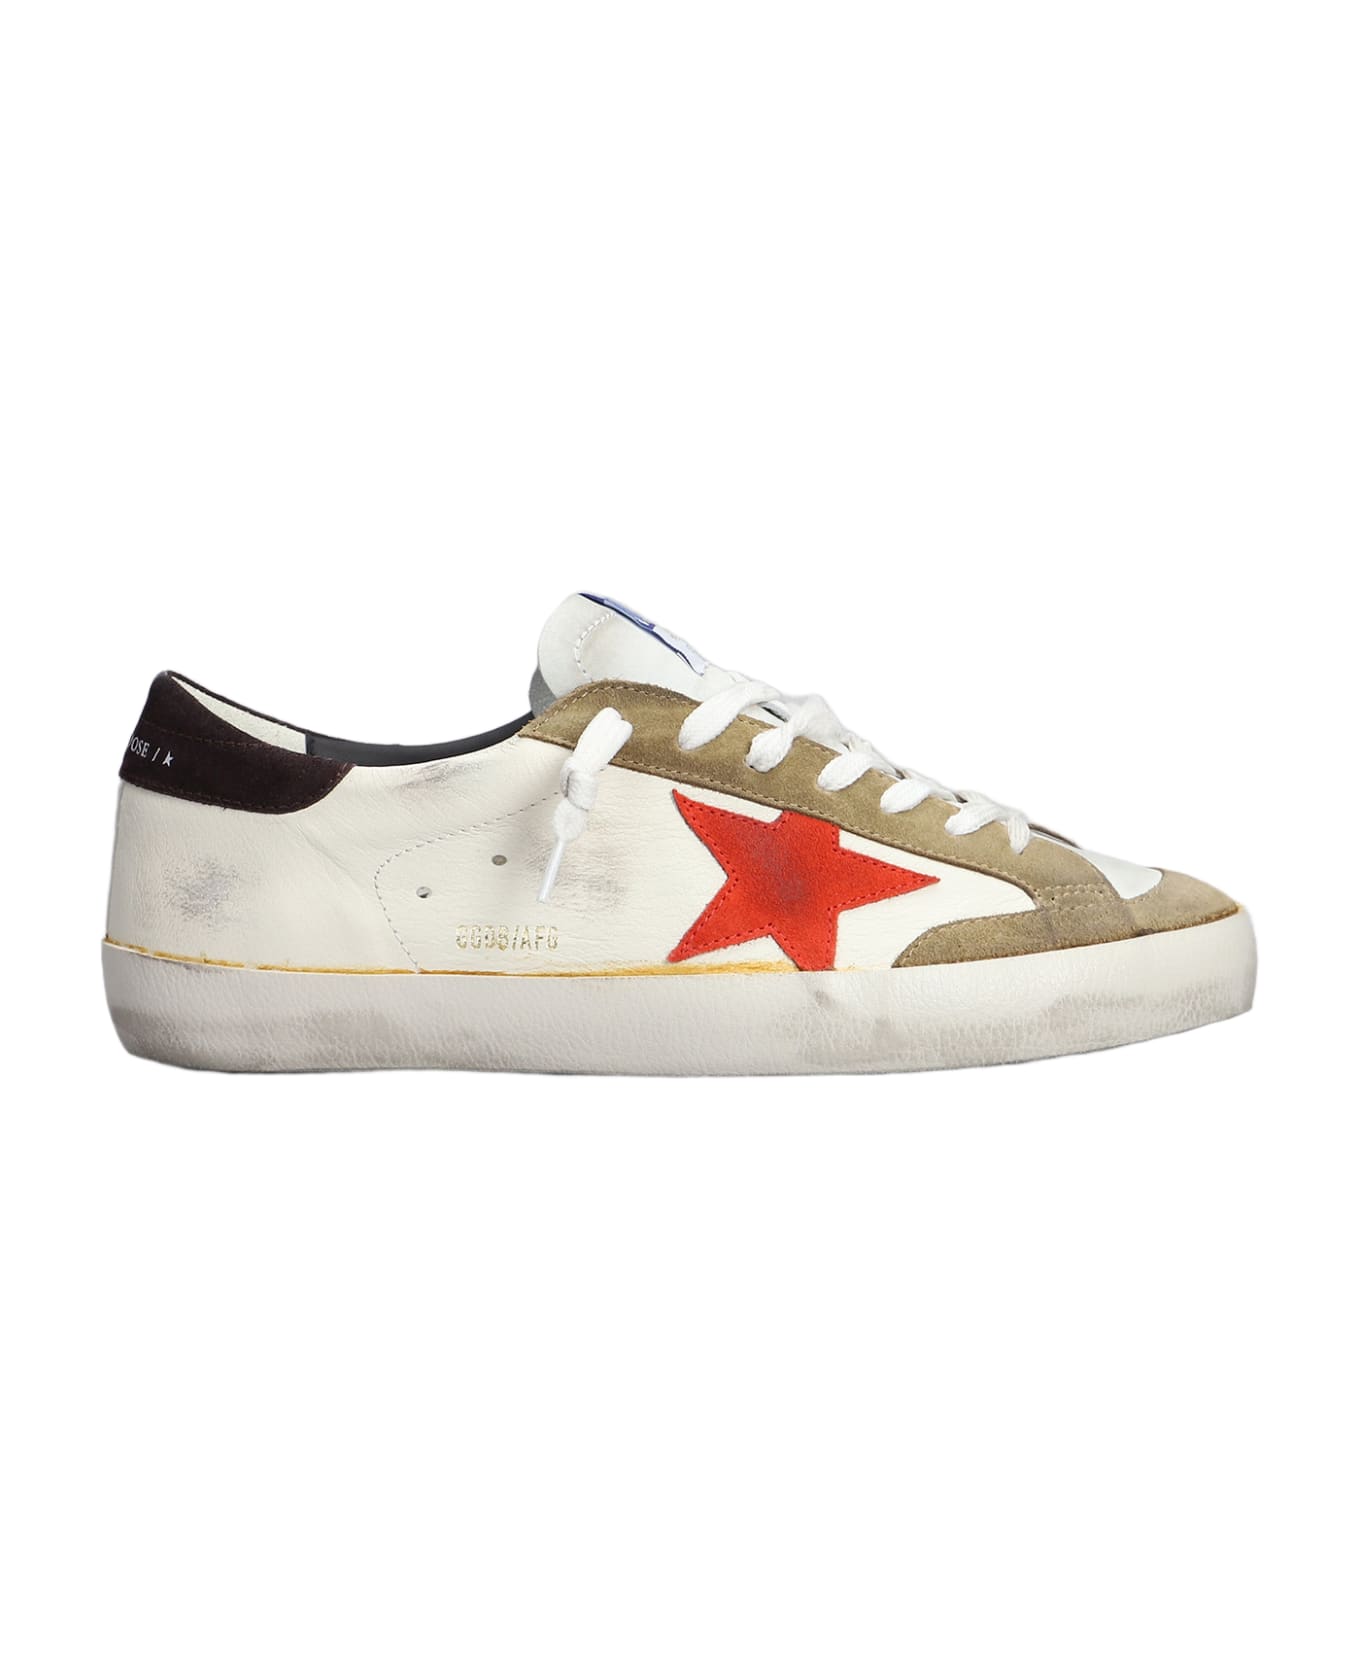 Golden Goose Superstar Sneakers In White Suede And Leather - 10531